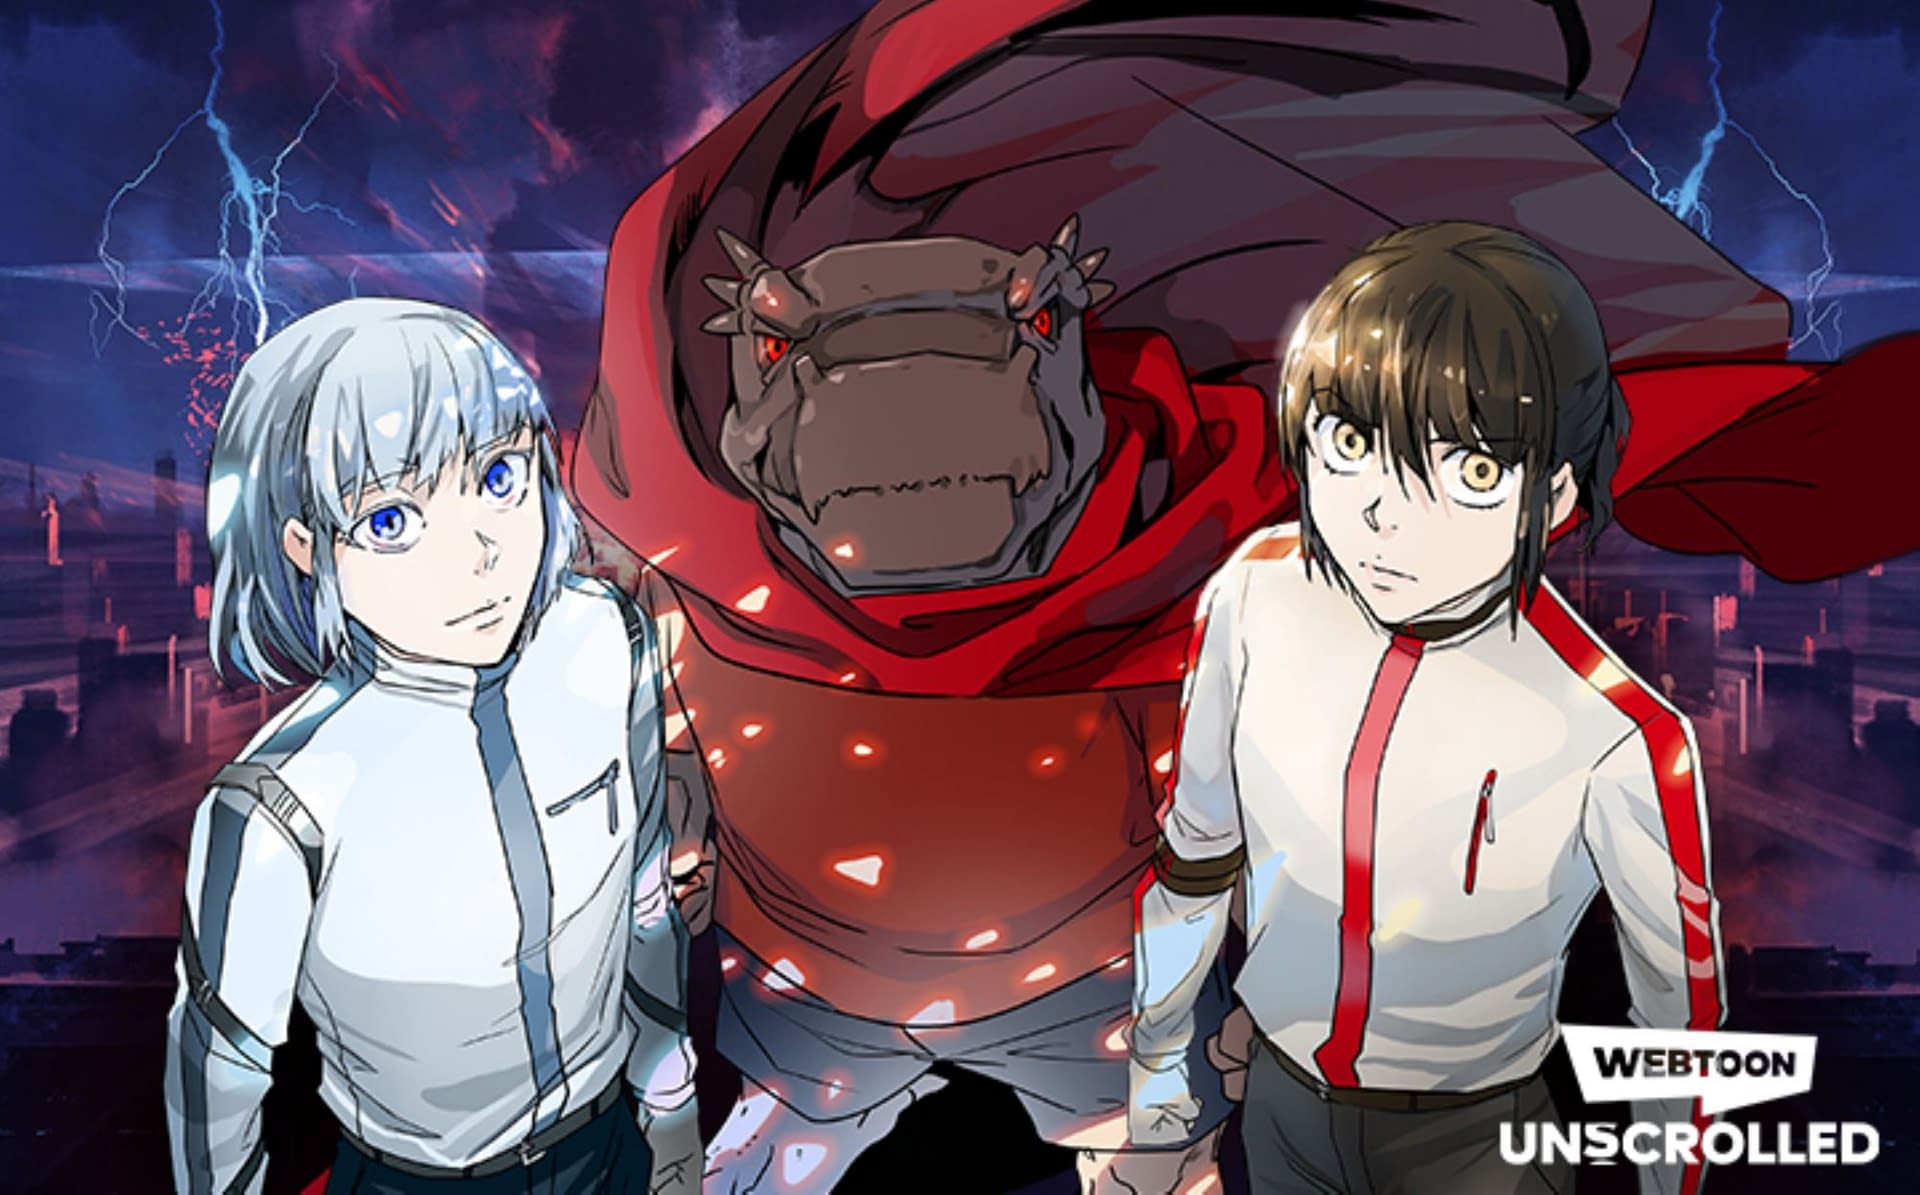 Tower of God Episode 3 Clip Teases a Deadly New Challenge (Exclusive)